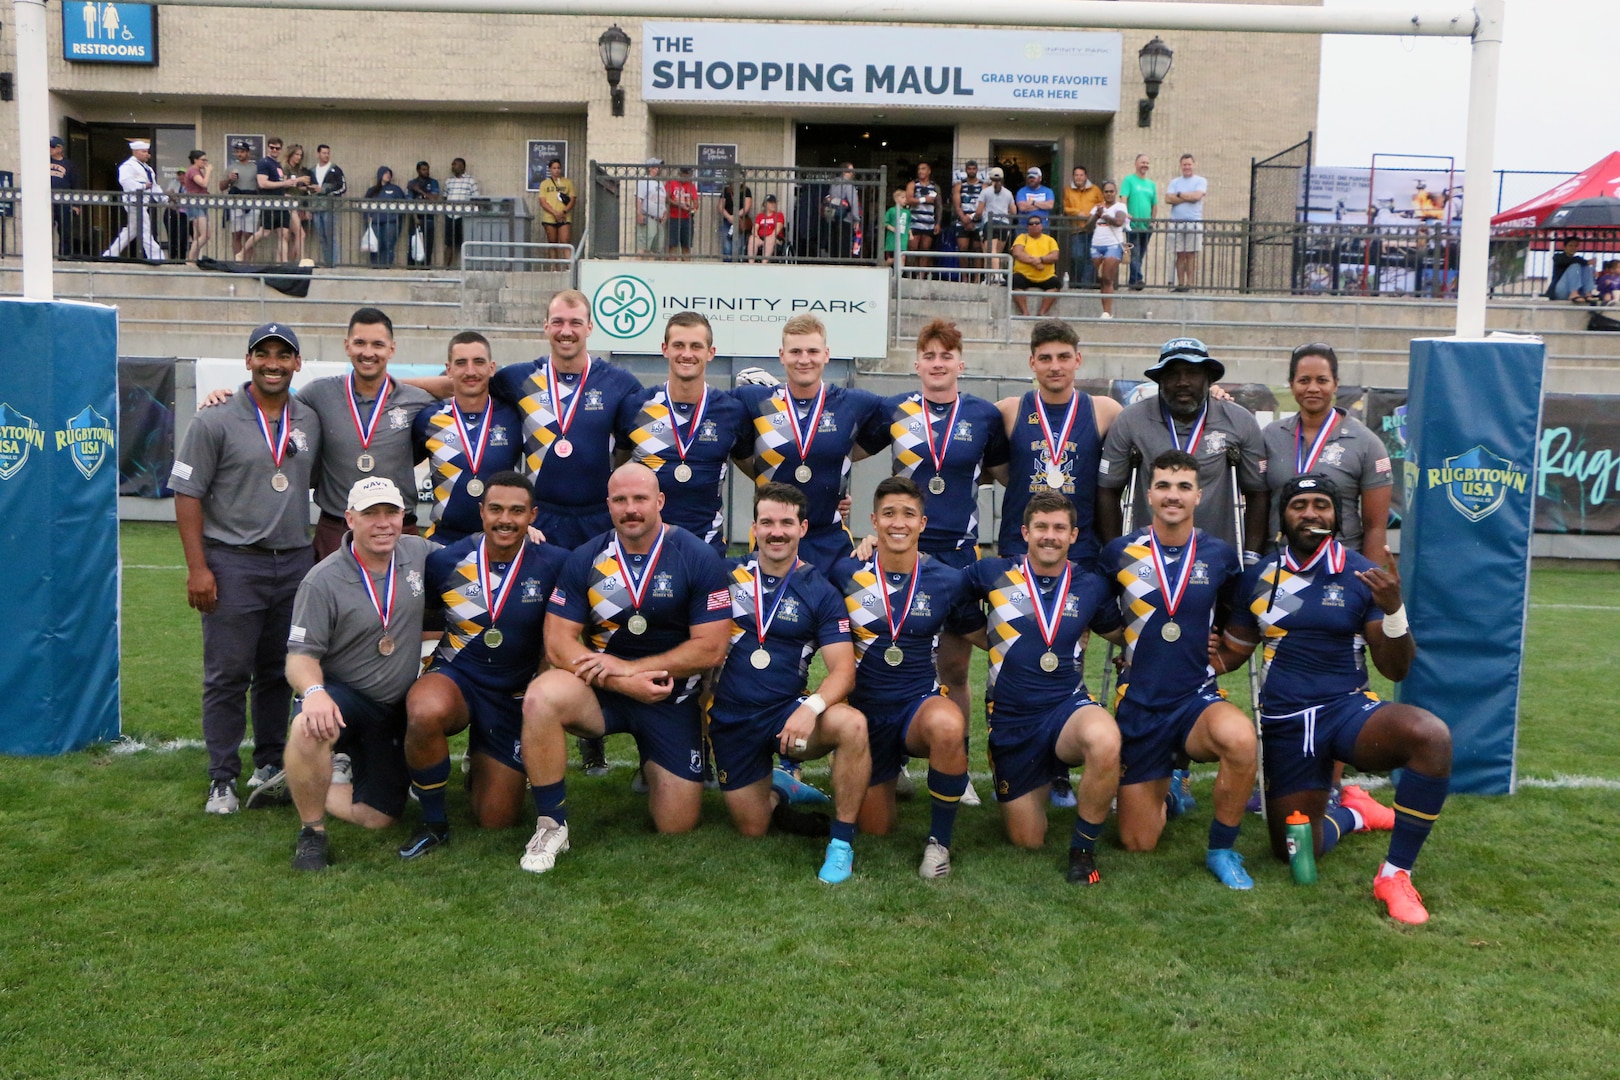 All-Navy Rugby holding their silver medals after the championship match of the 2022 Armed Forces Sports Men's Rugby Championship held in conjunction with the Rugbytown 7's Rugby Tournament in Glendale, Colo.  Championship features teams from the Army, Marine Corps, Navy, Air Force (with Space Force players), and Coast Guard.